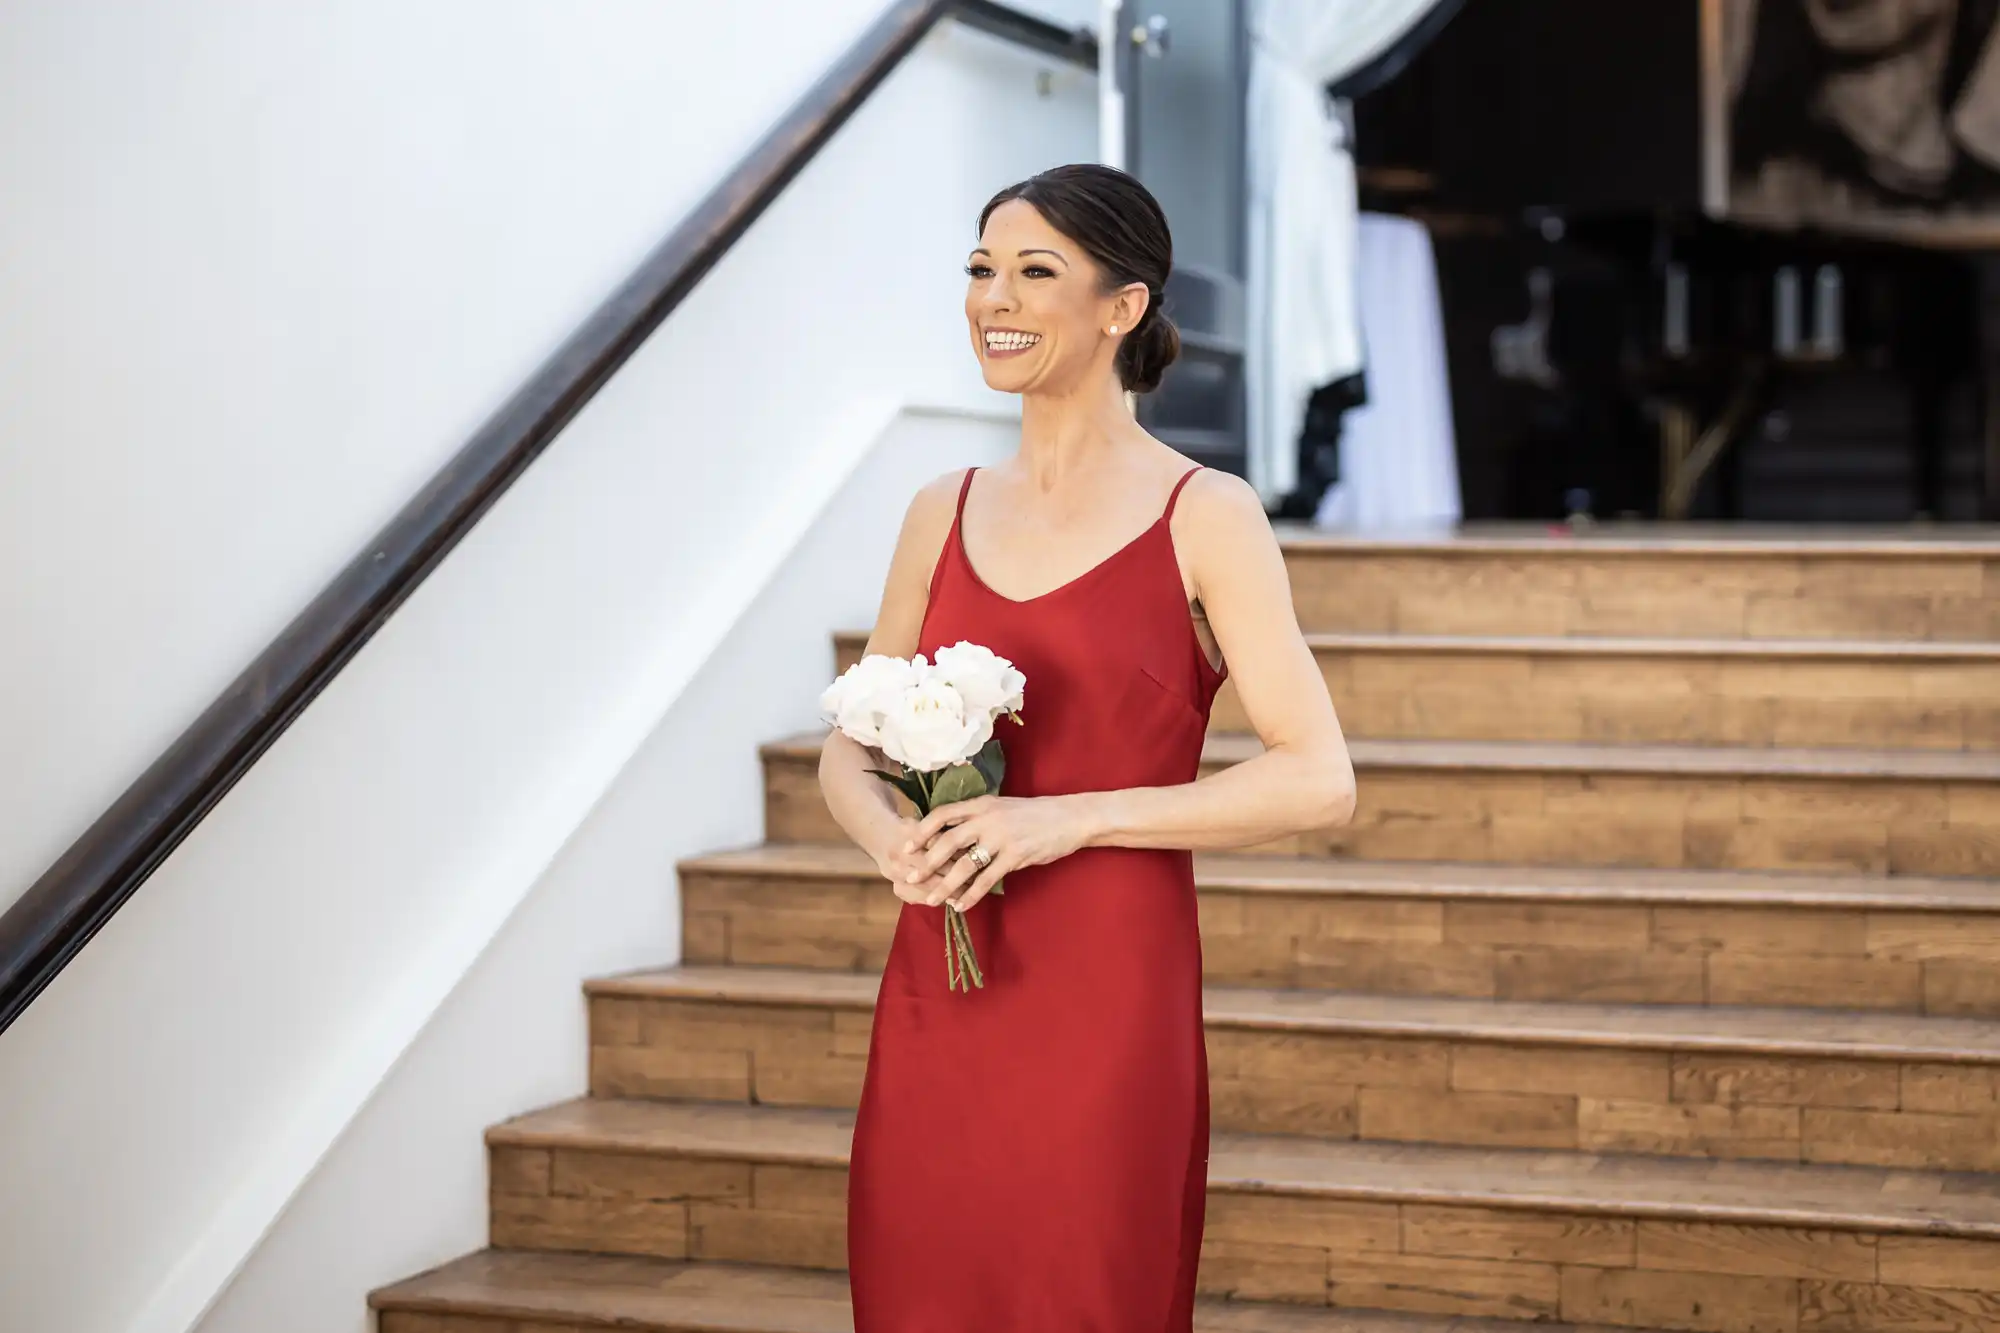 A woman in a red dress holds a bouquet of white flowers and smiles while standing on a wooden staircase.